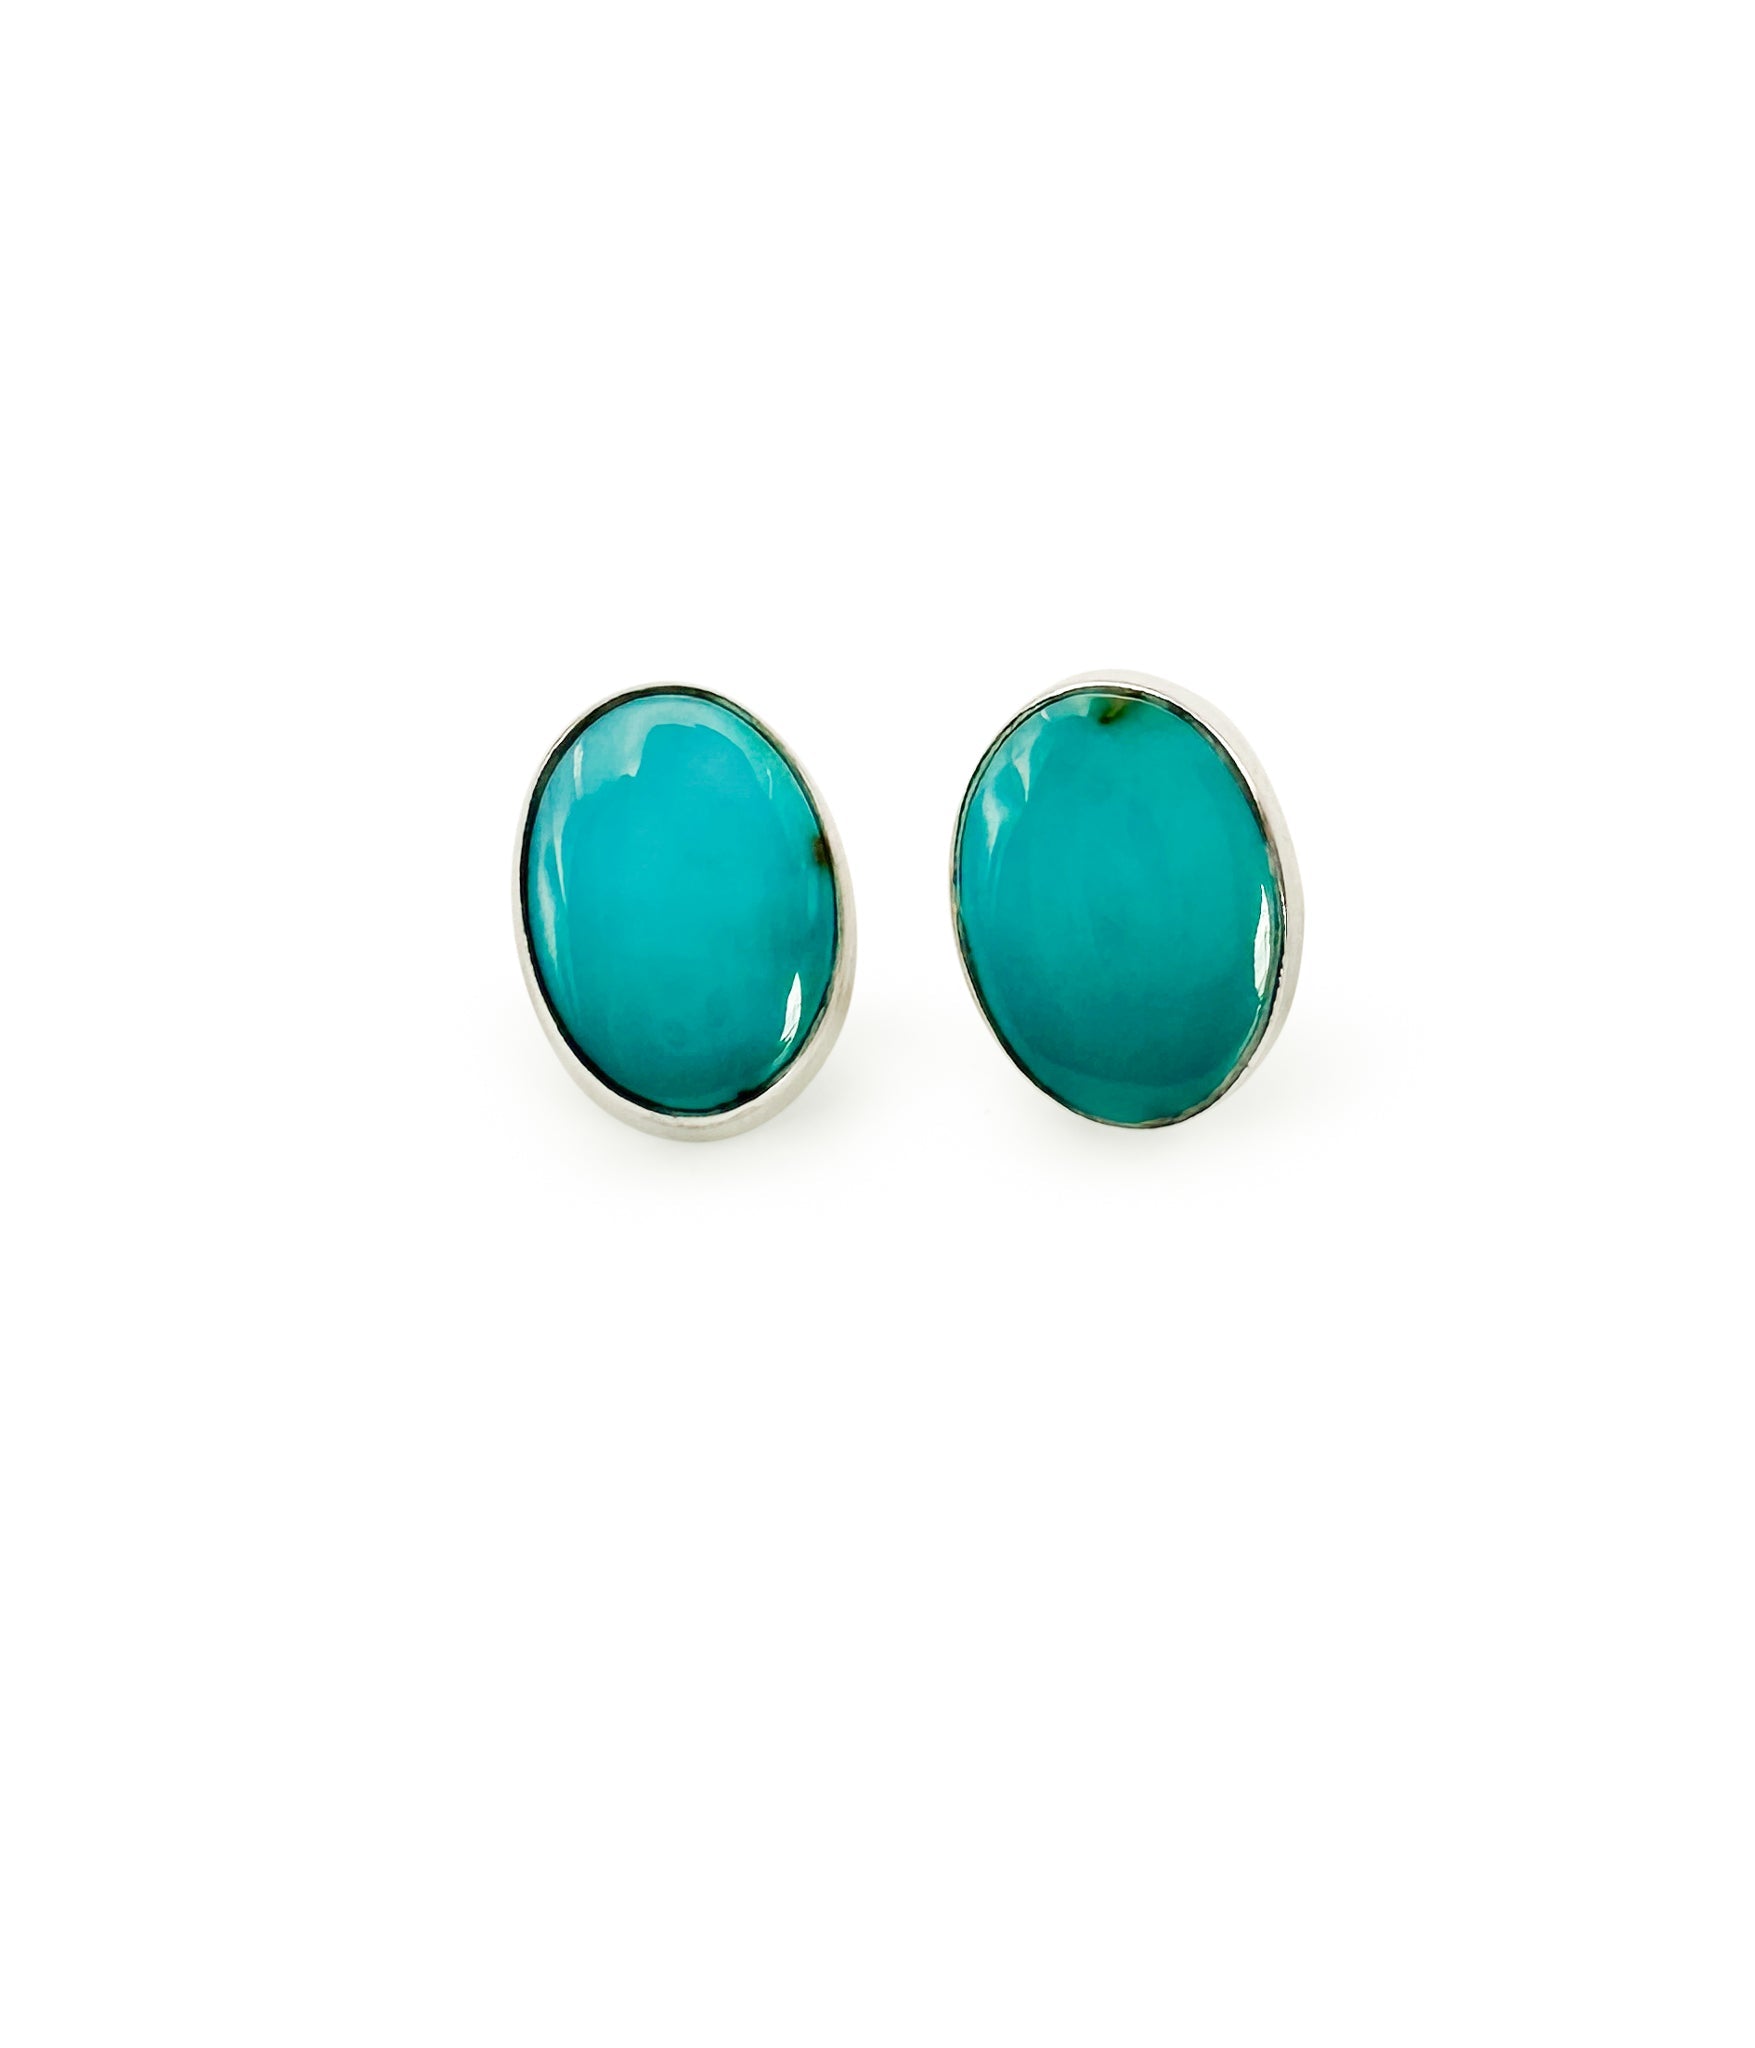 Santa Rose Authentic Turquoise Earrings